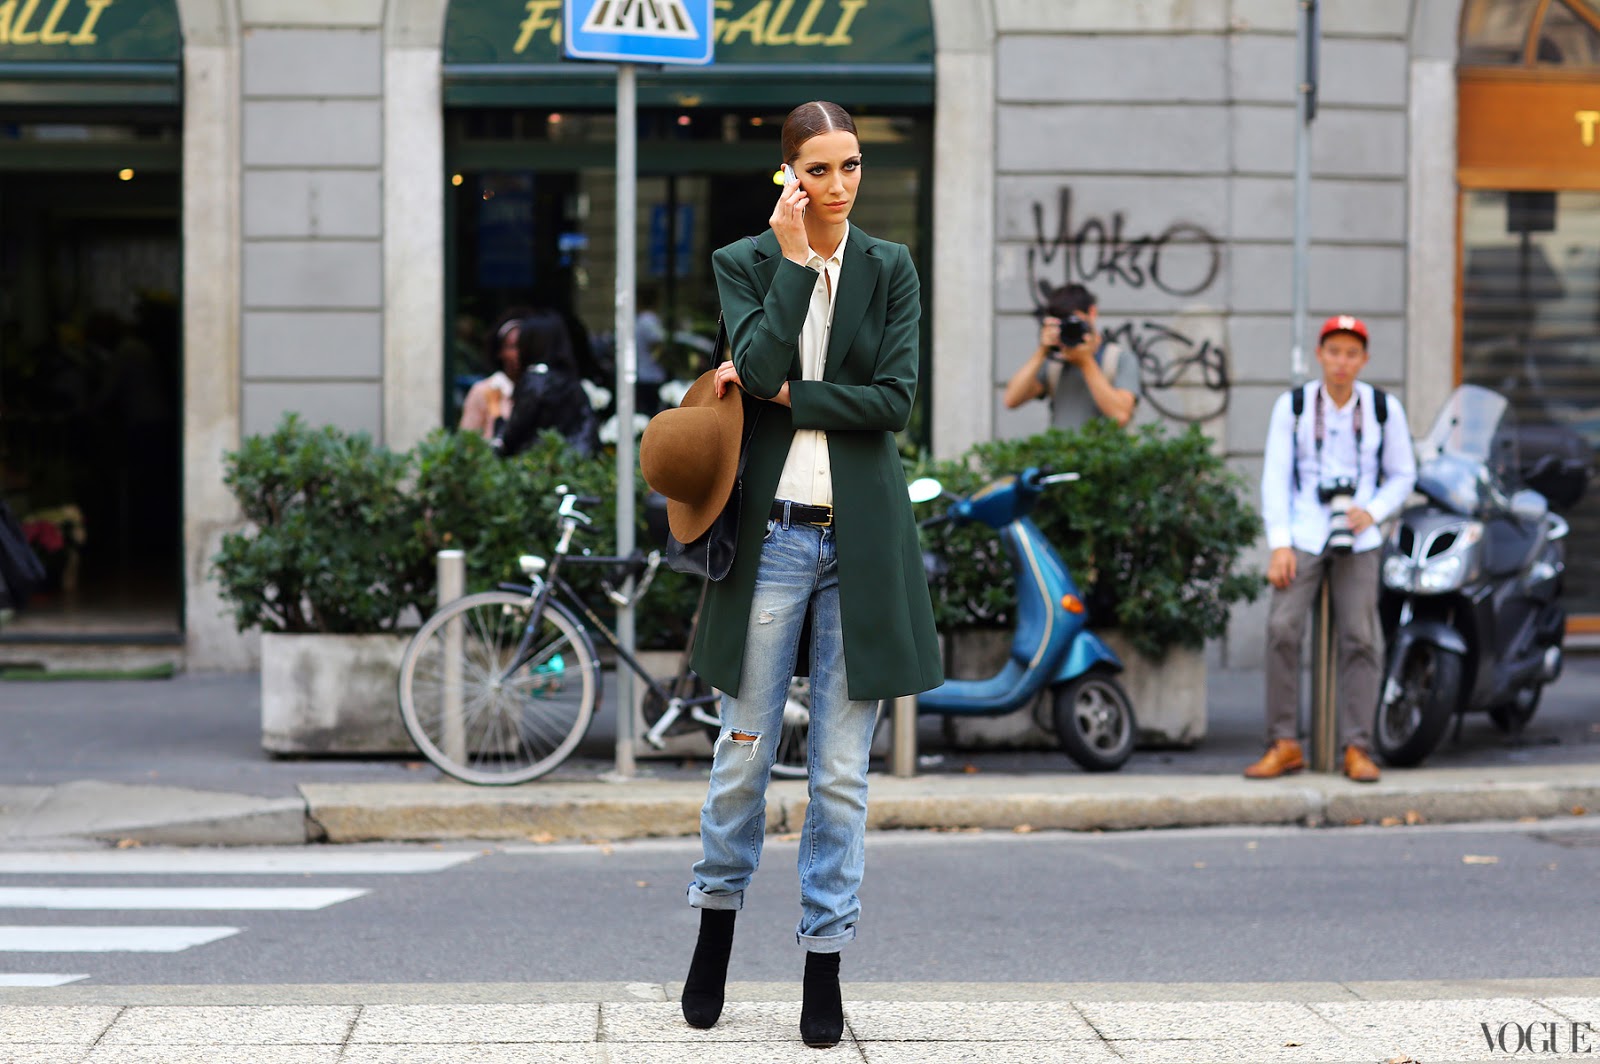 Jeans, Denim, Jeand Streetstyle, Street Style, Fashion, fashion Week, Ripped Jeans, Inspiration, Must Have Jeans, Outfit Jeans, Look Jeans, Italian Fashion Blogger, Top Fashion Blogger